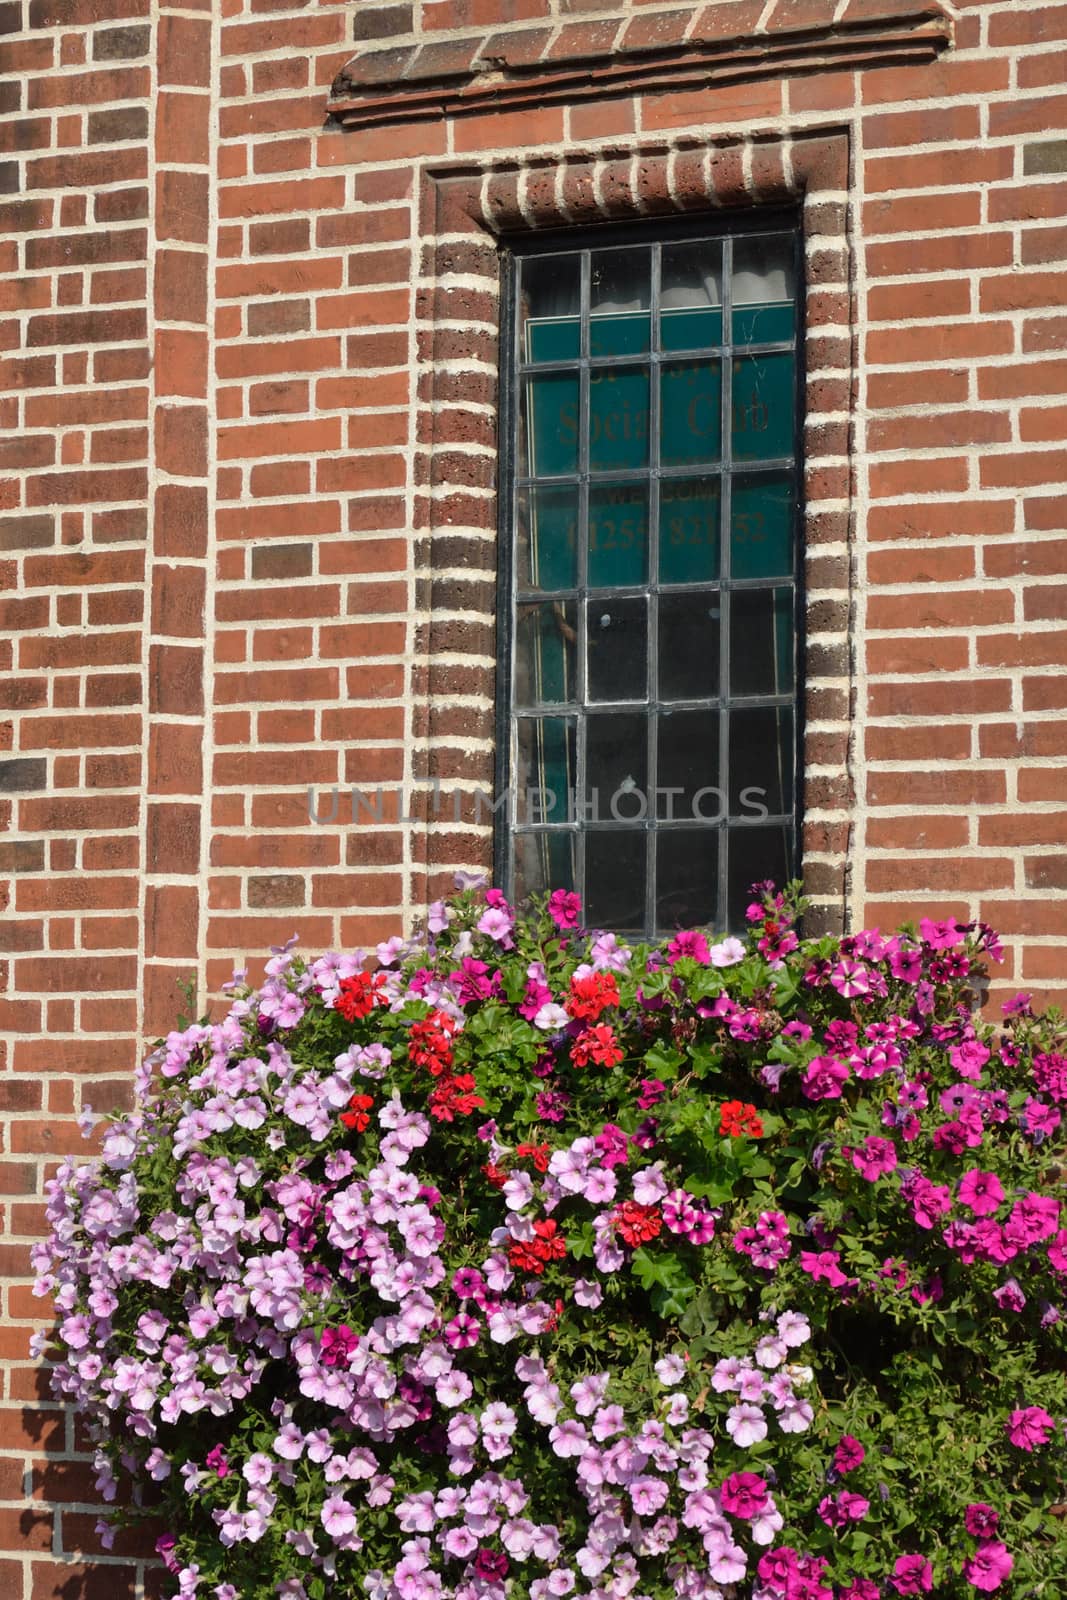 Flowers and window by pauws99